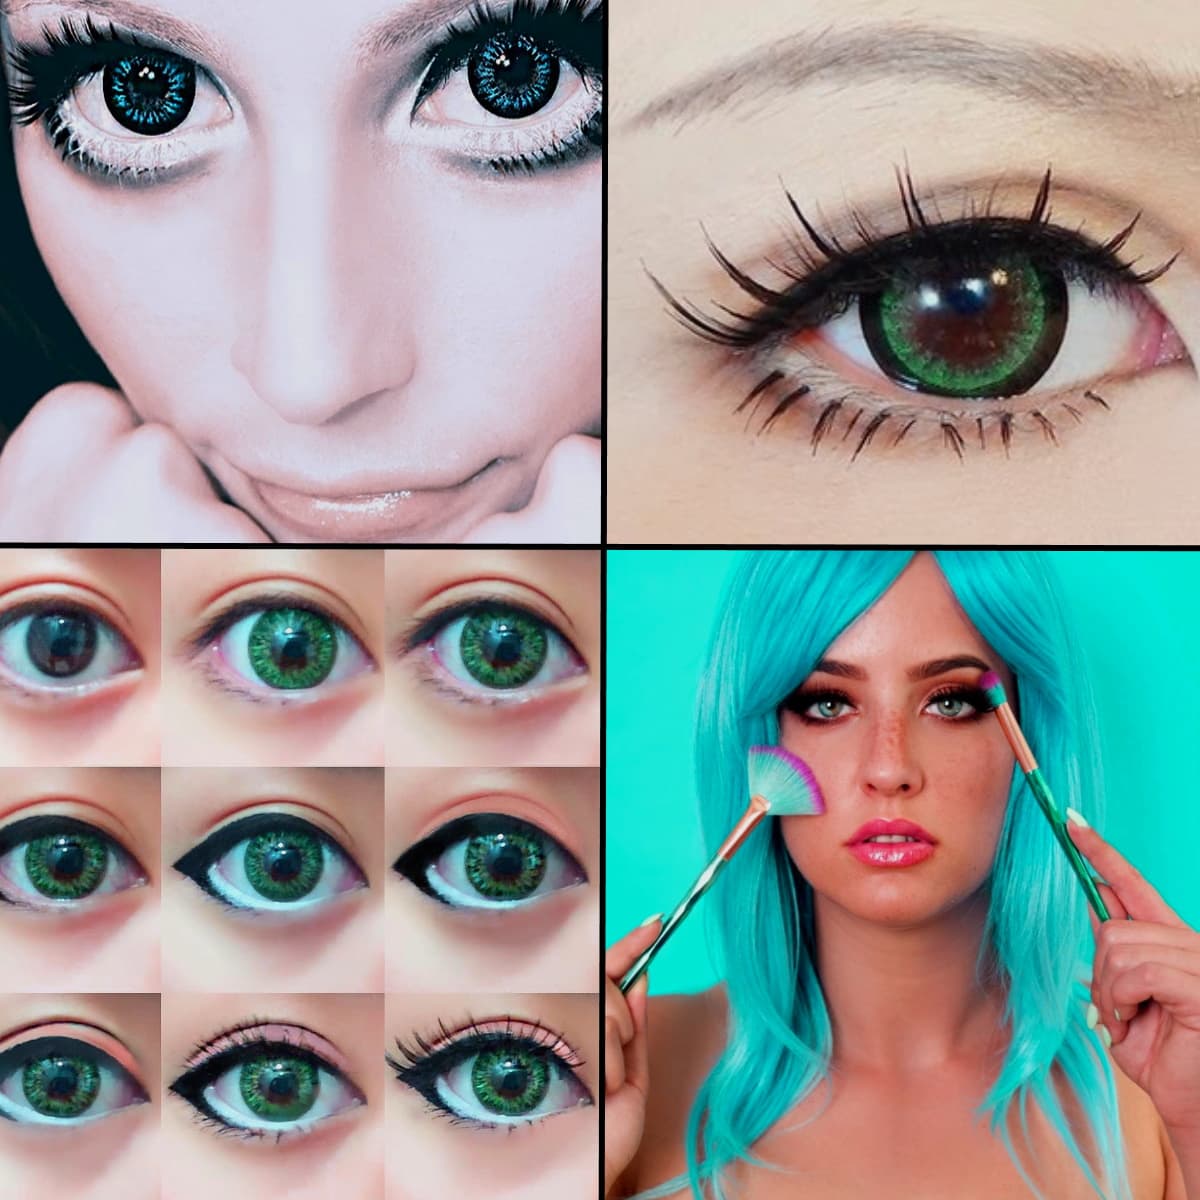 Aside from wearing contacts, cosplayers should also learn how to put on the...